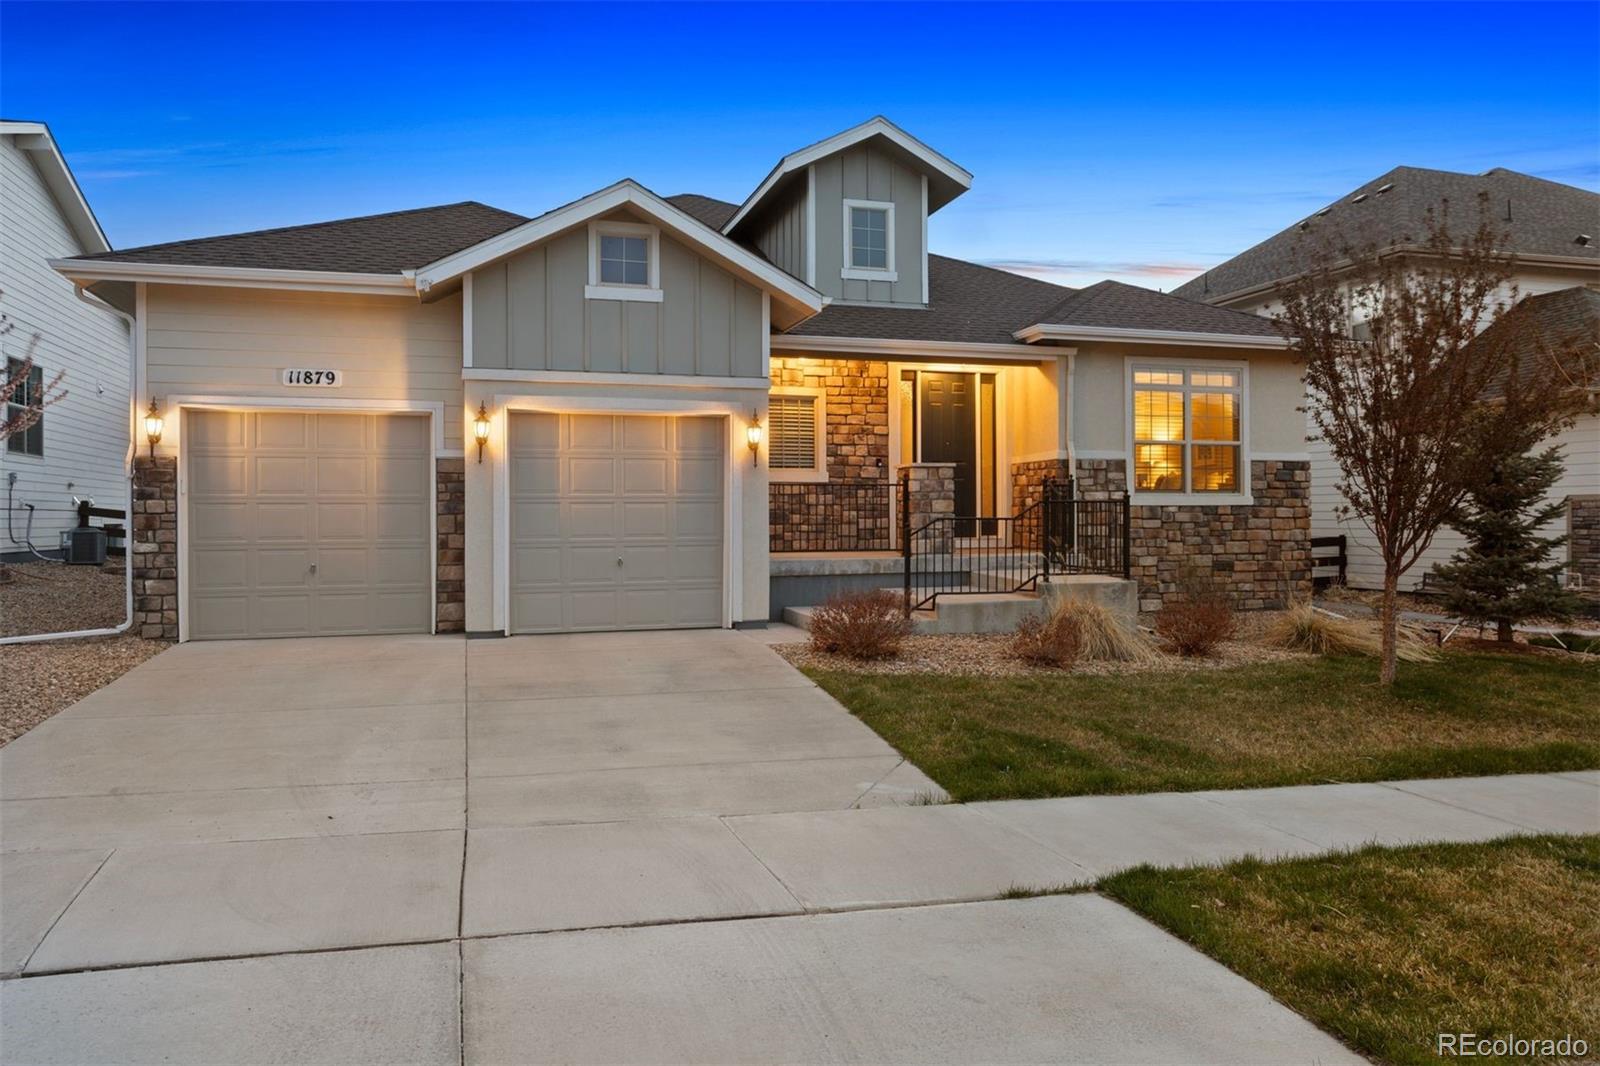 Report Image for 11879  Discovery Circle,Parker, Colorado